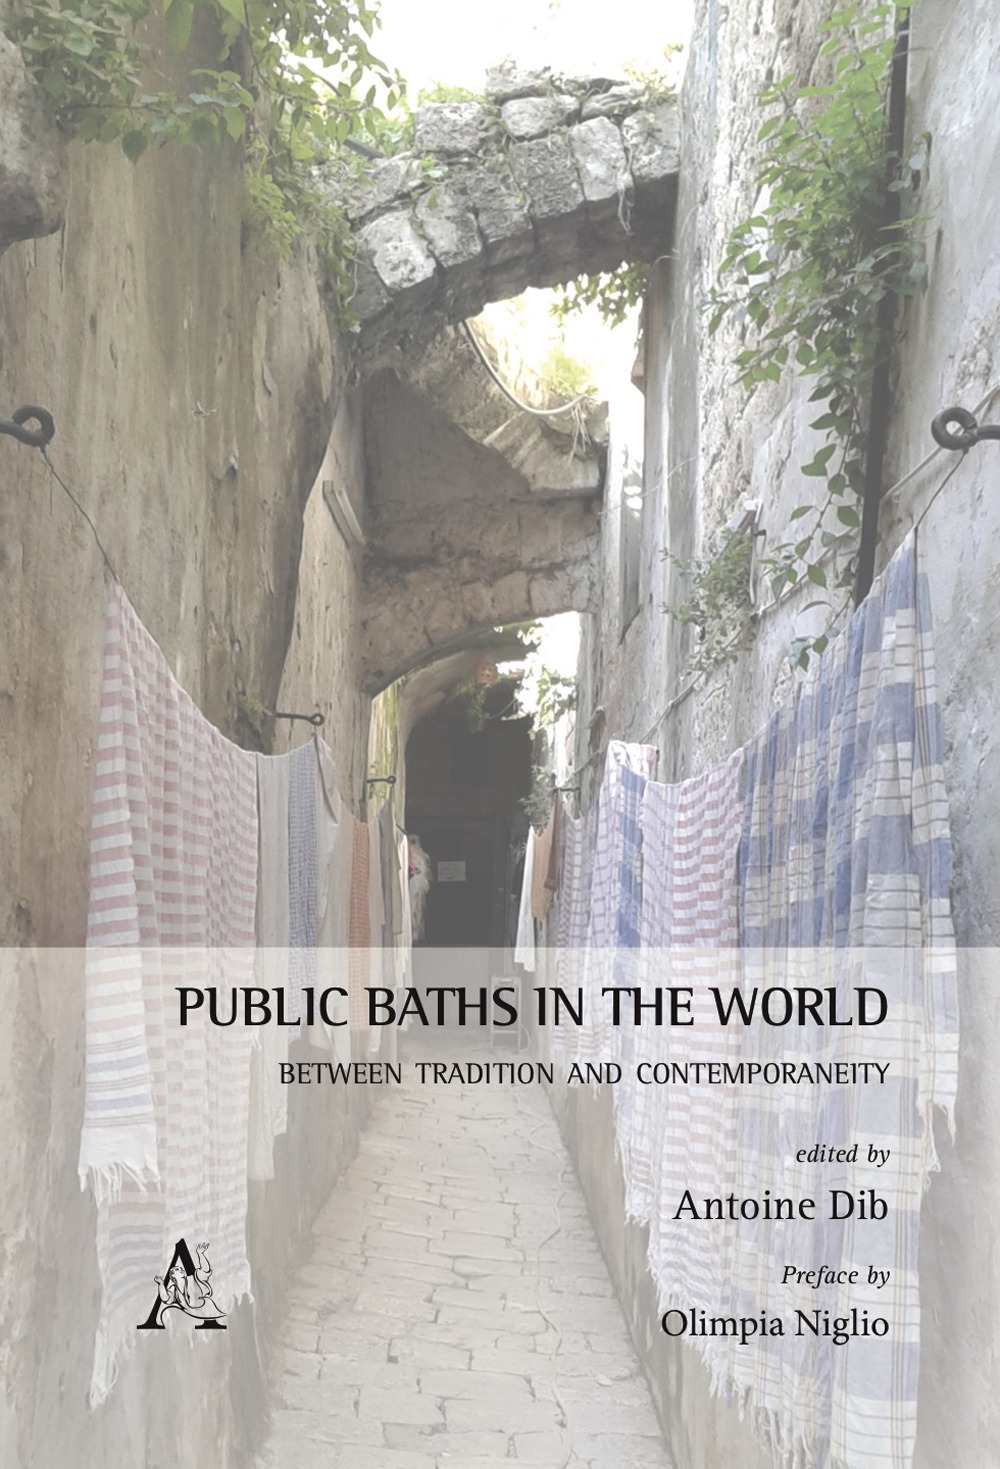 Public baths in the world. Between tradition and contemporaneity